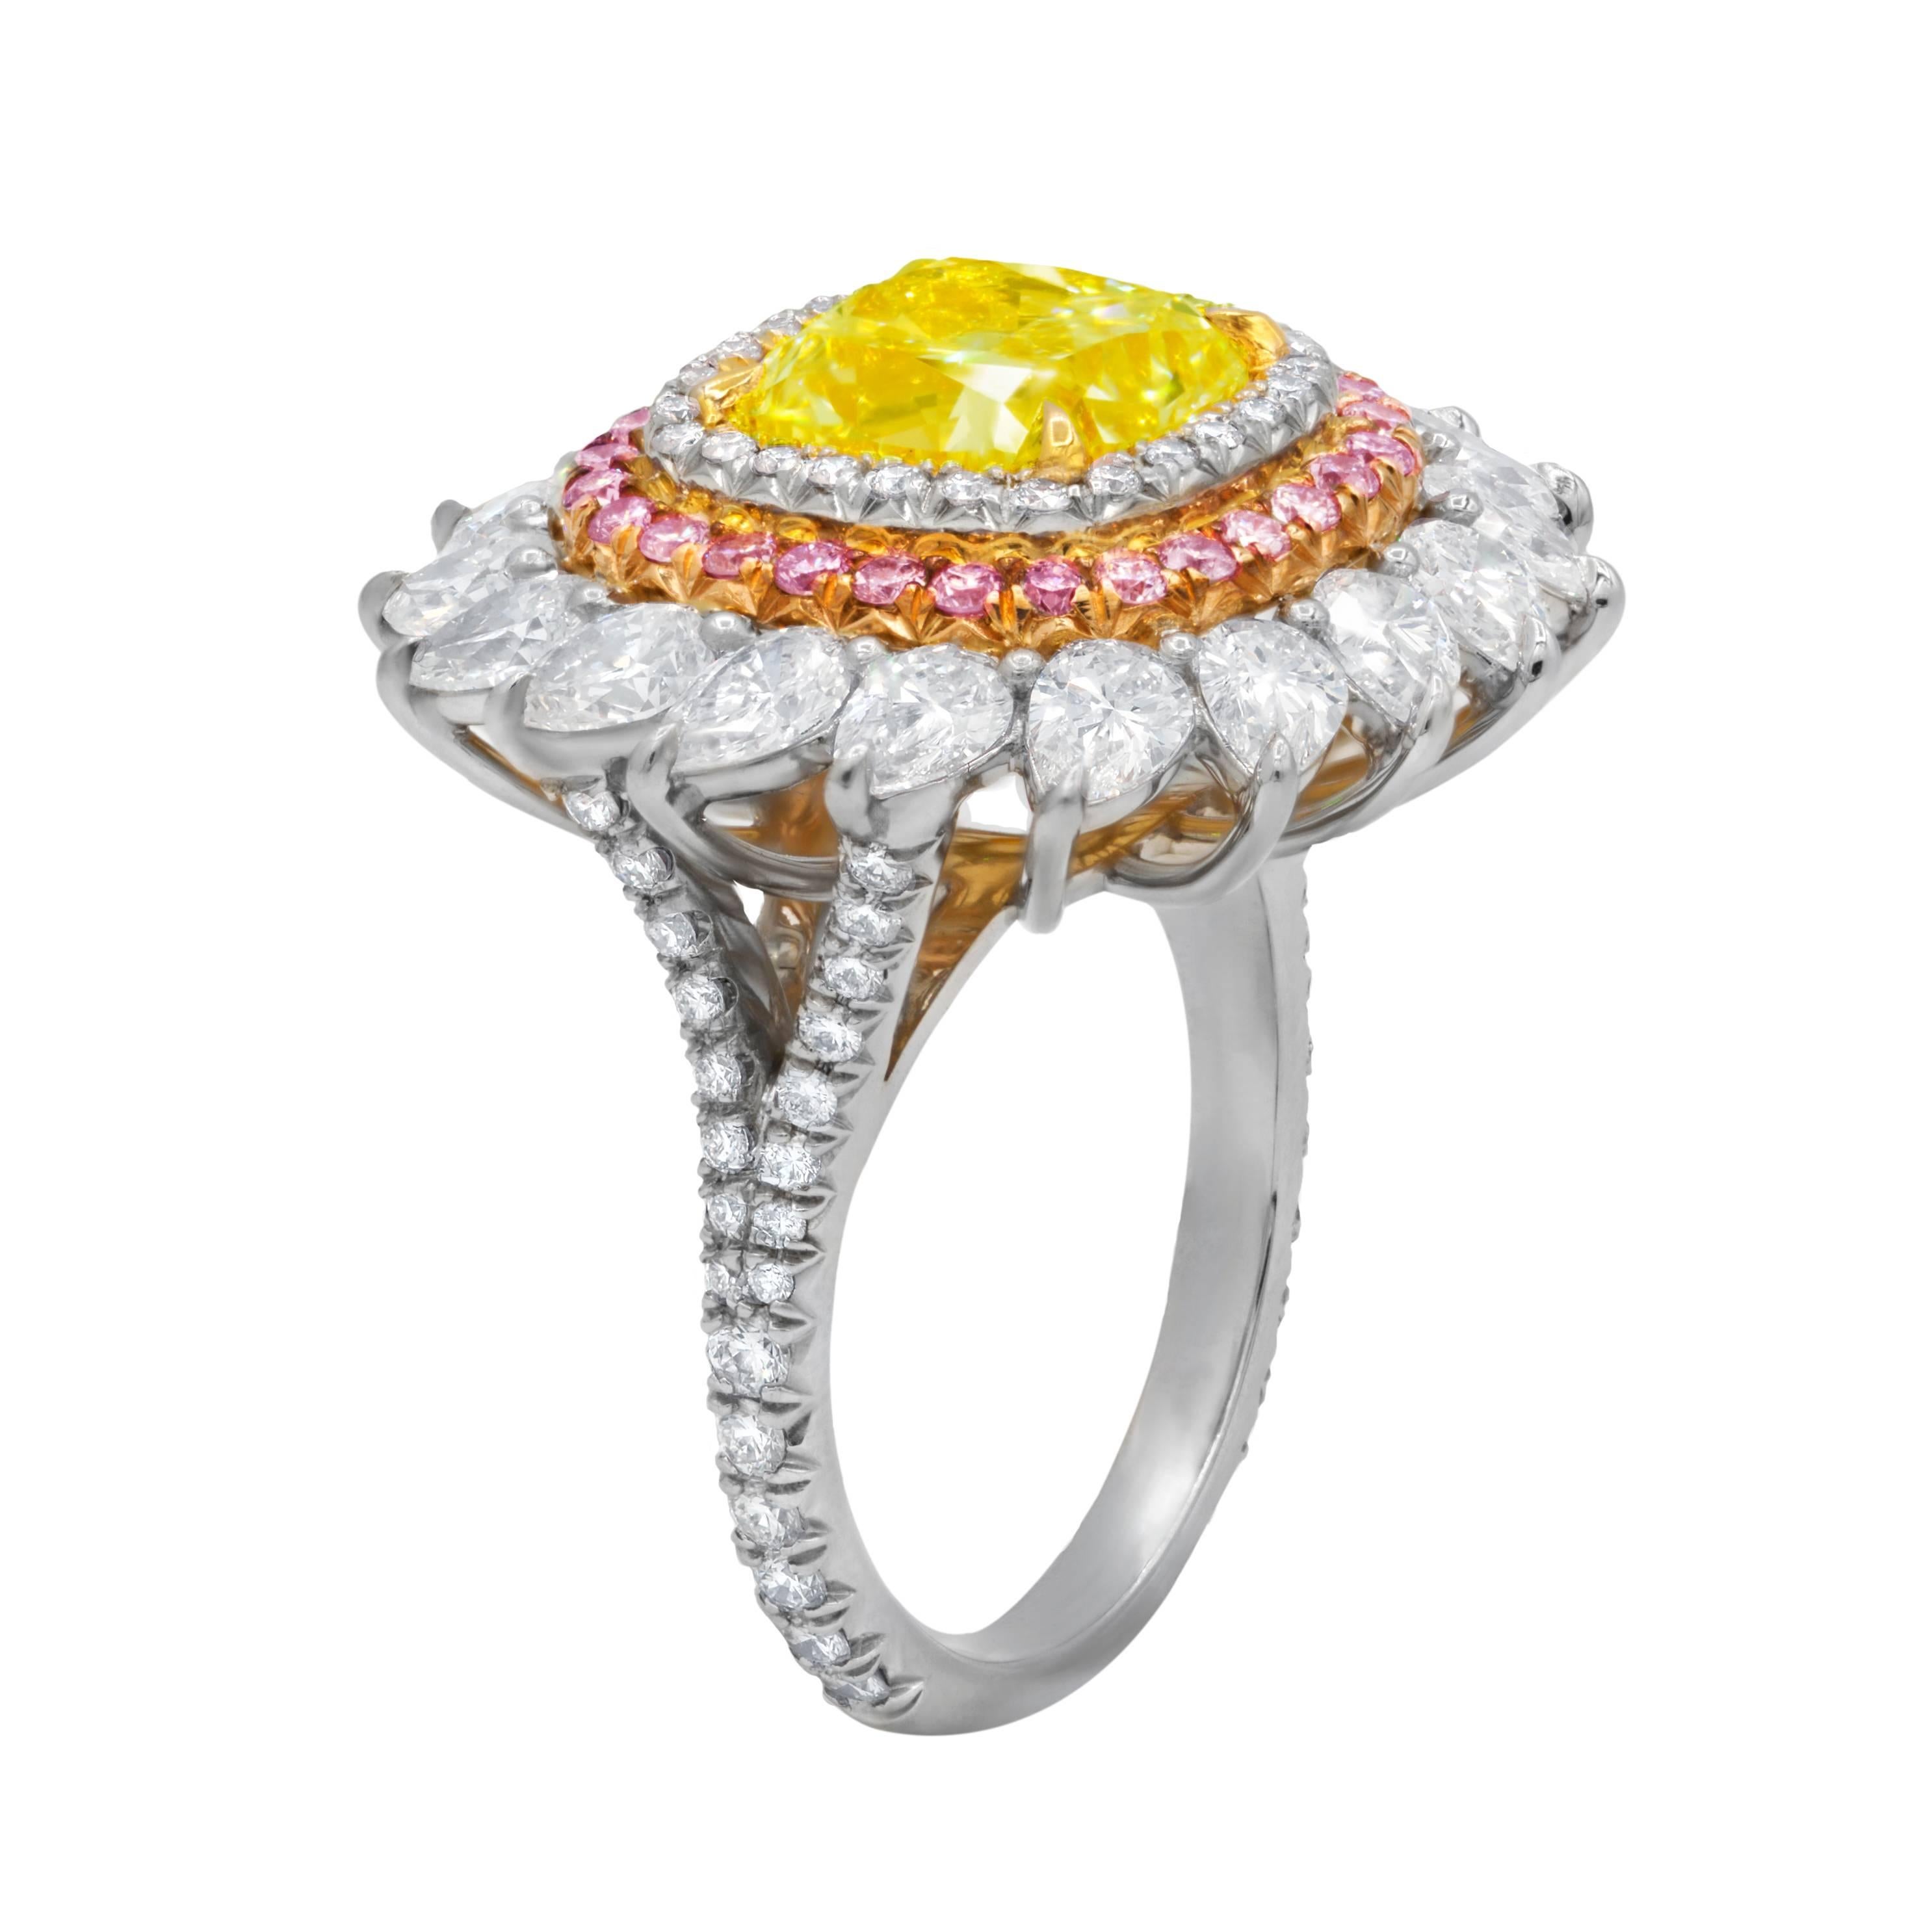 Platinum Yellow Diamond Ring, features 4.03 Carats Fancy Light Yellow Certified Cushion Cut diamond in the center, VS1 in Clarity, surrounded by triple row of multi shaped diamonds totaling 3.75 Carats of White Diamonds F-G in Color VS1-VS2 in